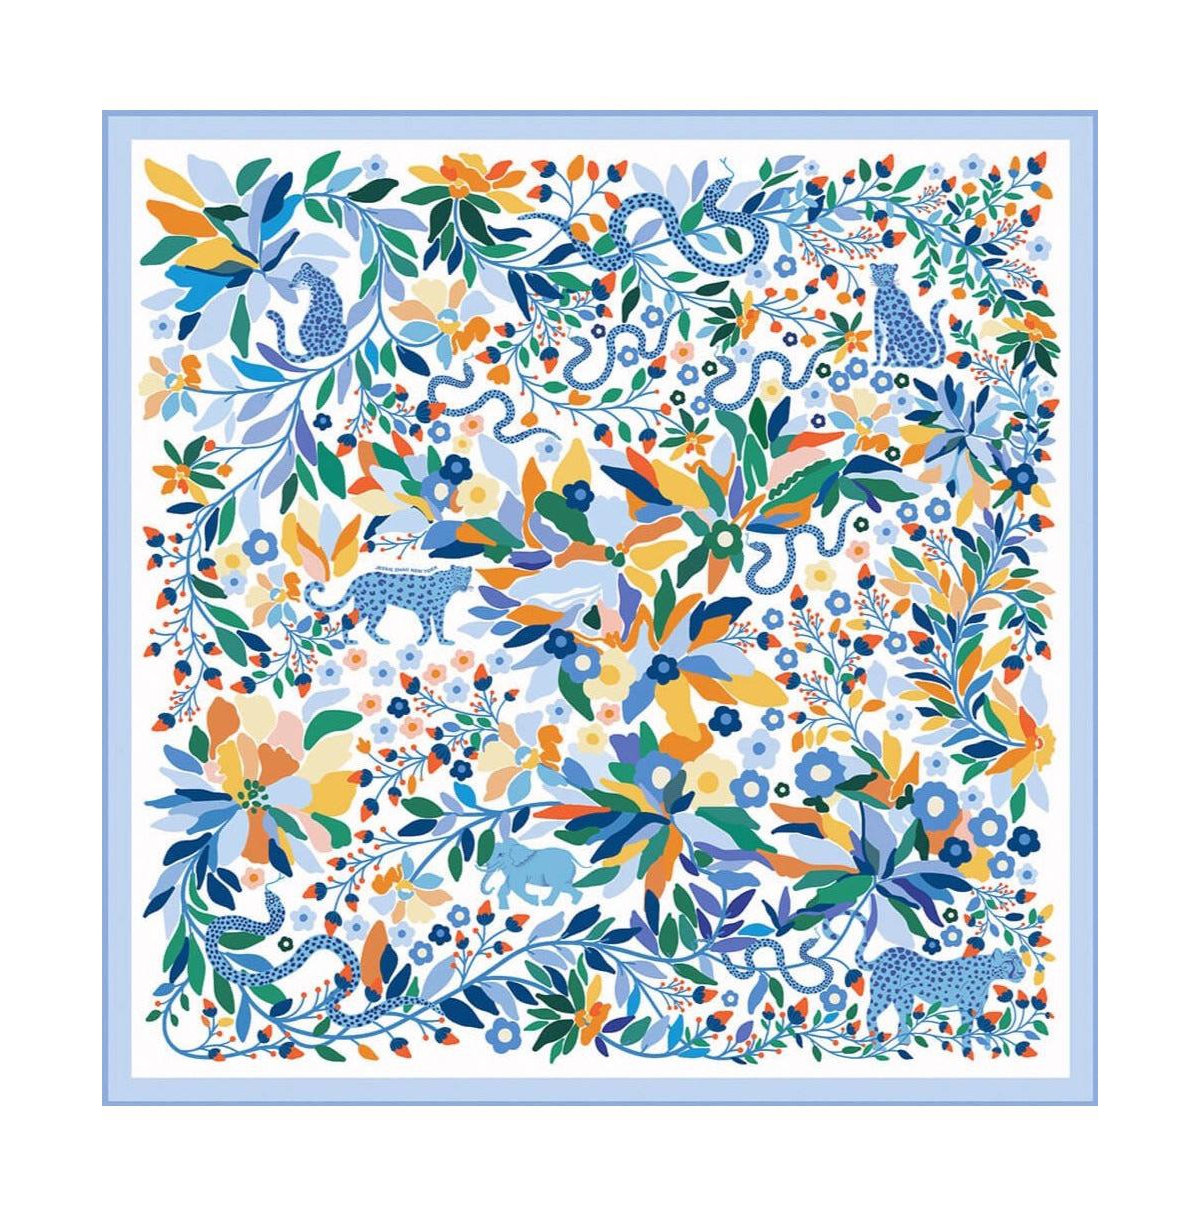 Silk Scarf Of Day Zoo - White and blue